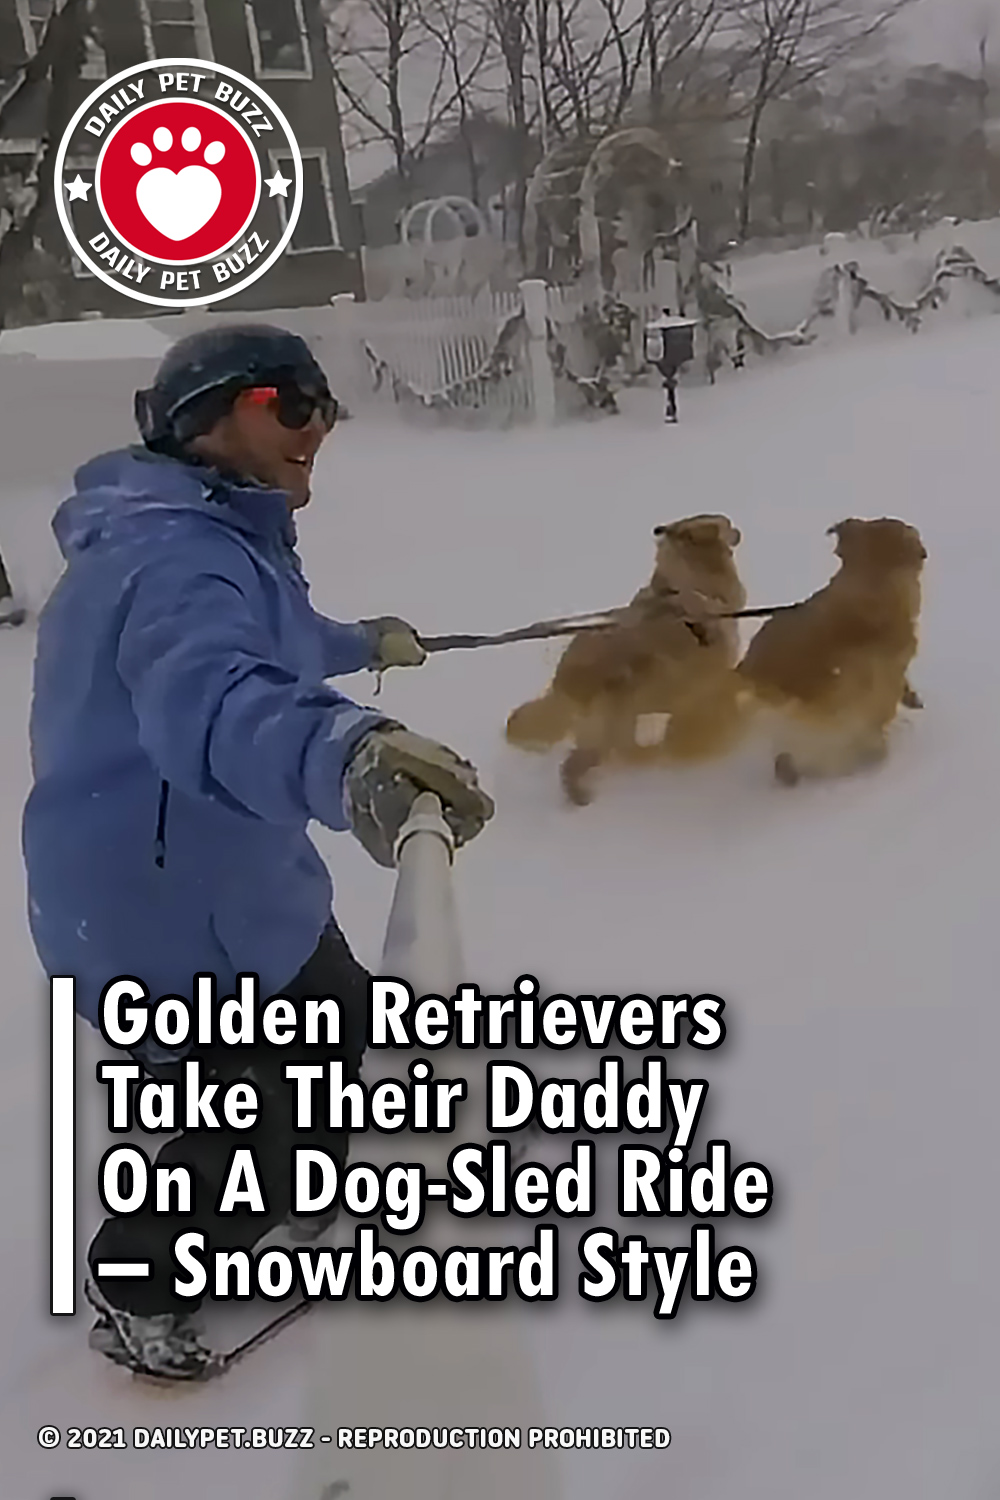 Golden Retrievers Take Their Daddy On A Dog-Sled Ride – Snowboard Style